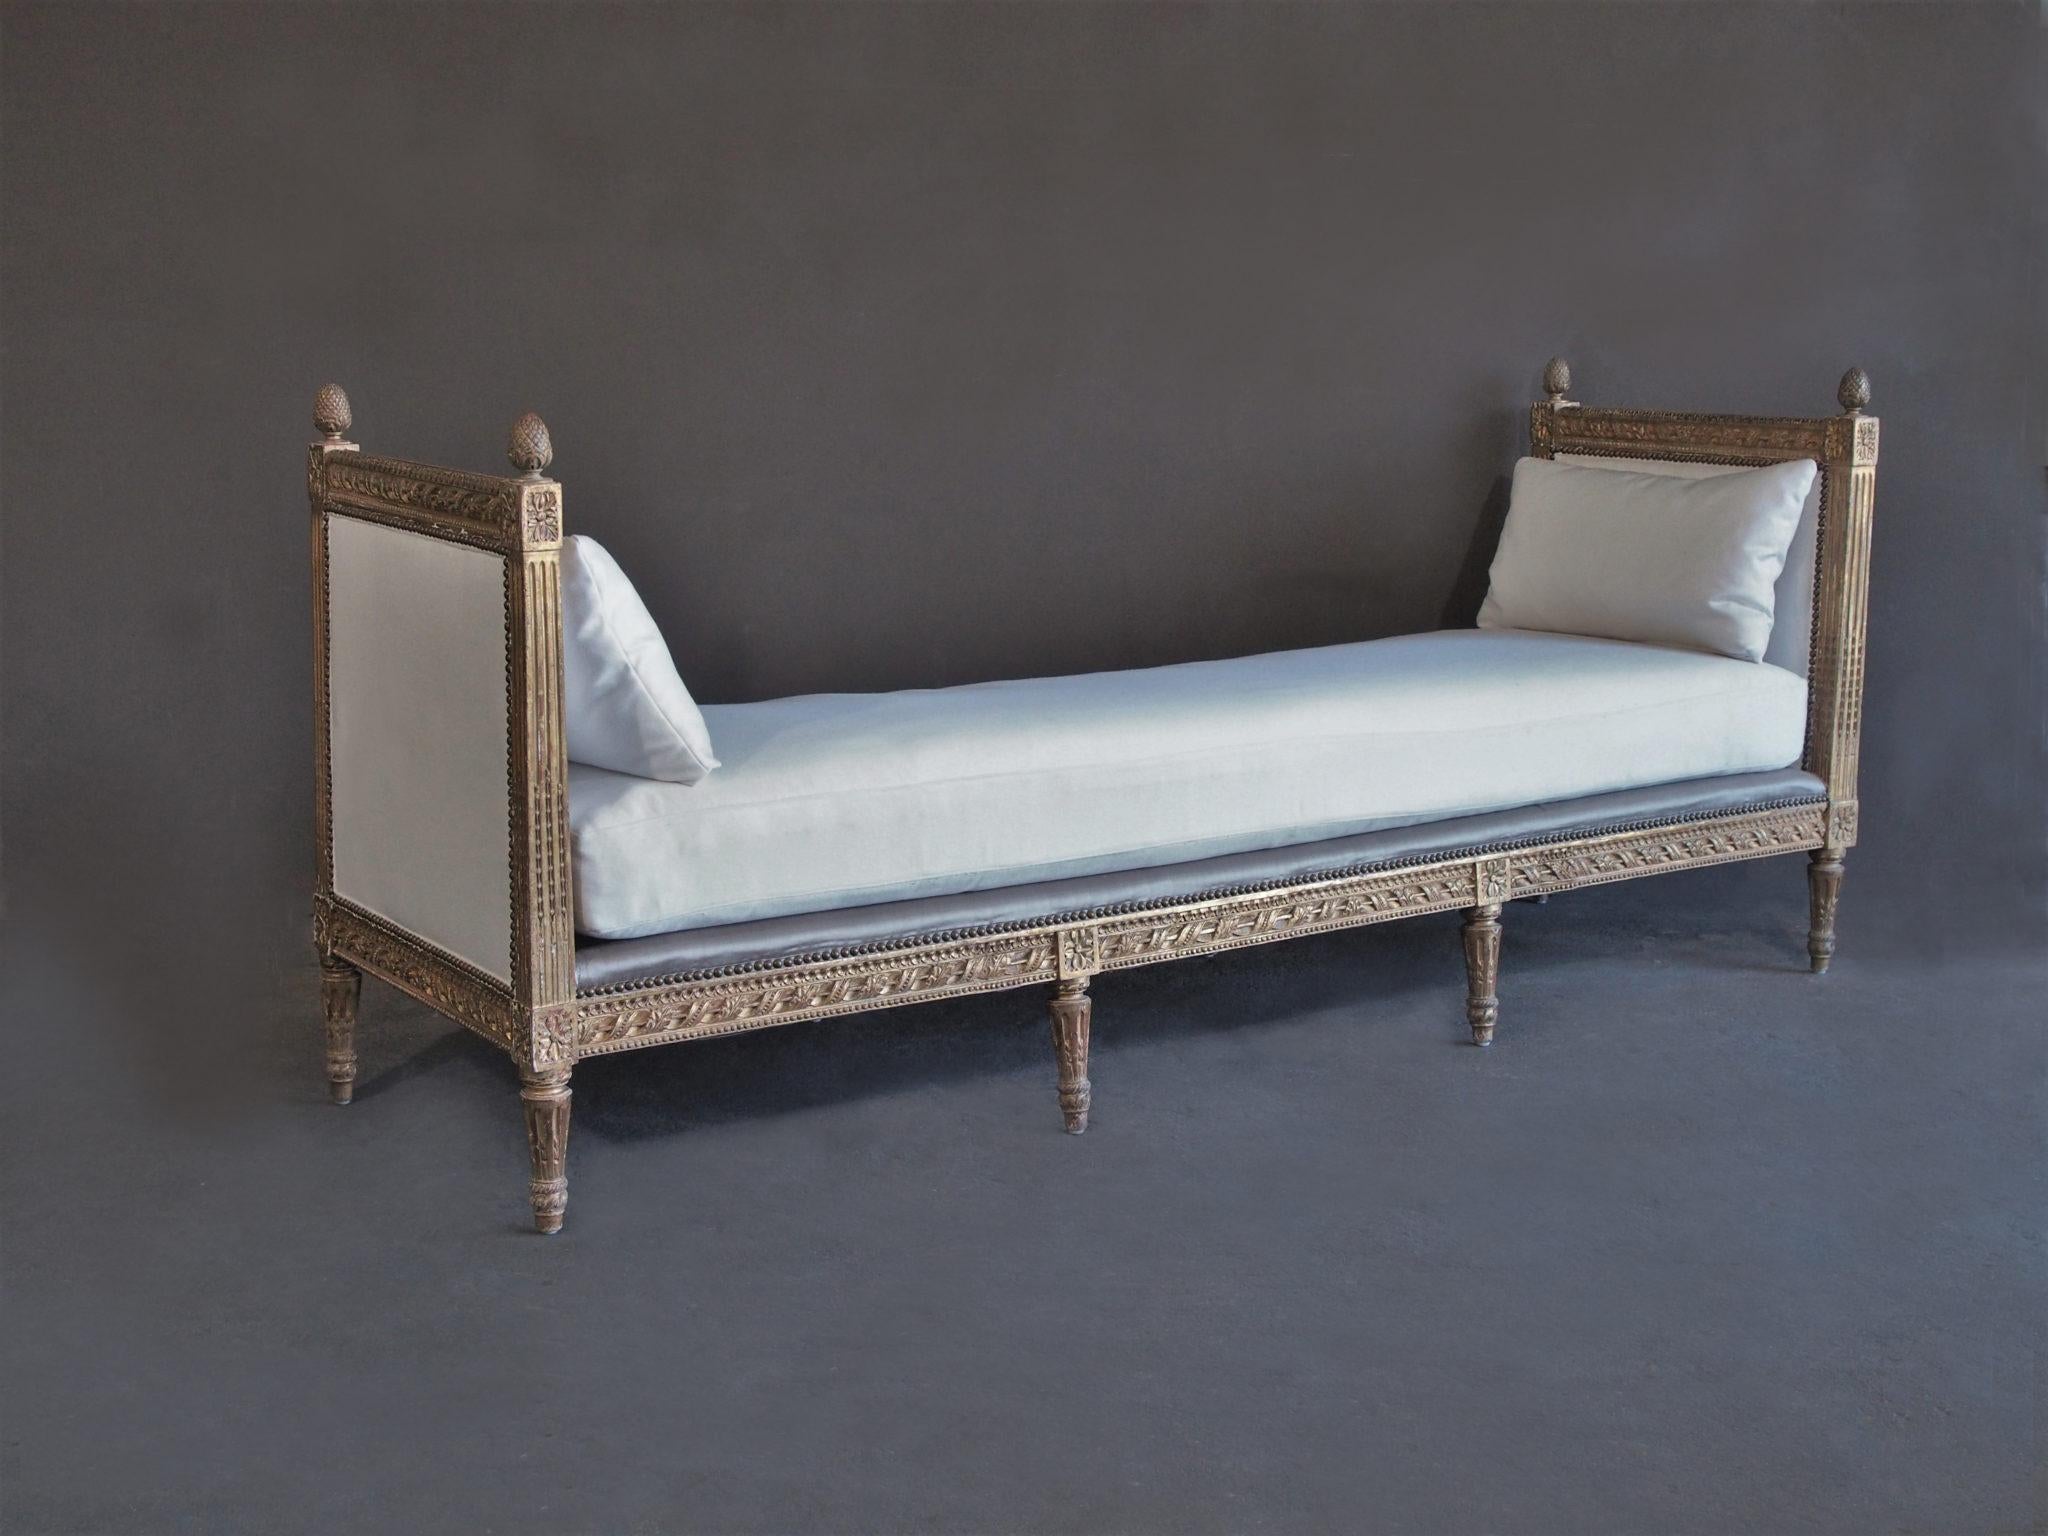 19th century French Louis XVI upholstered daybed. Beautiful as a sofa or simply as a place to relax. Finely carved framework – fluted and floral carving with detailed finials. Upholstery in heavy weight white Belgian Linen on mattress and on the end